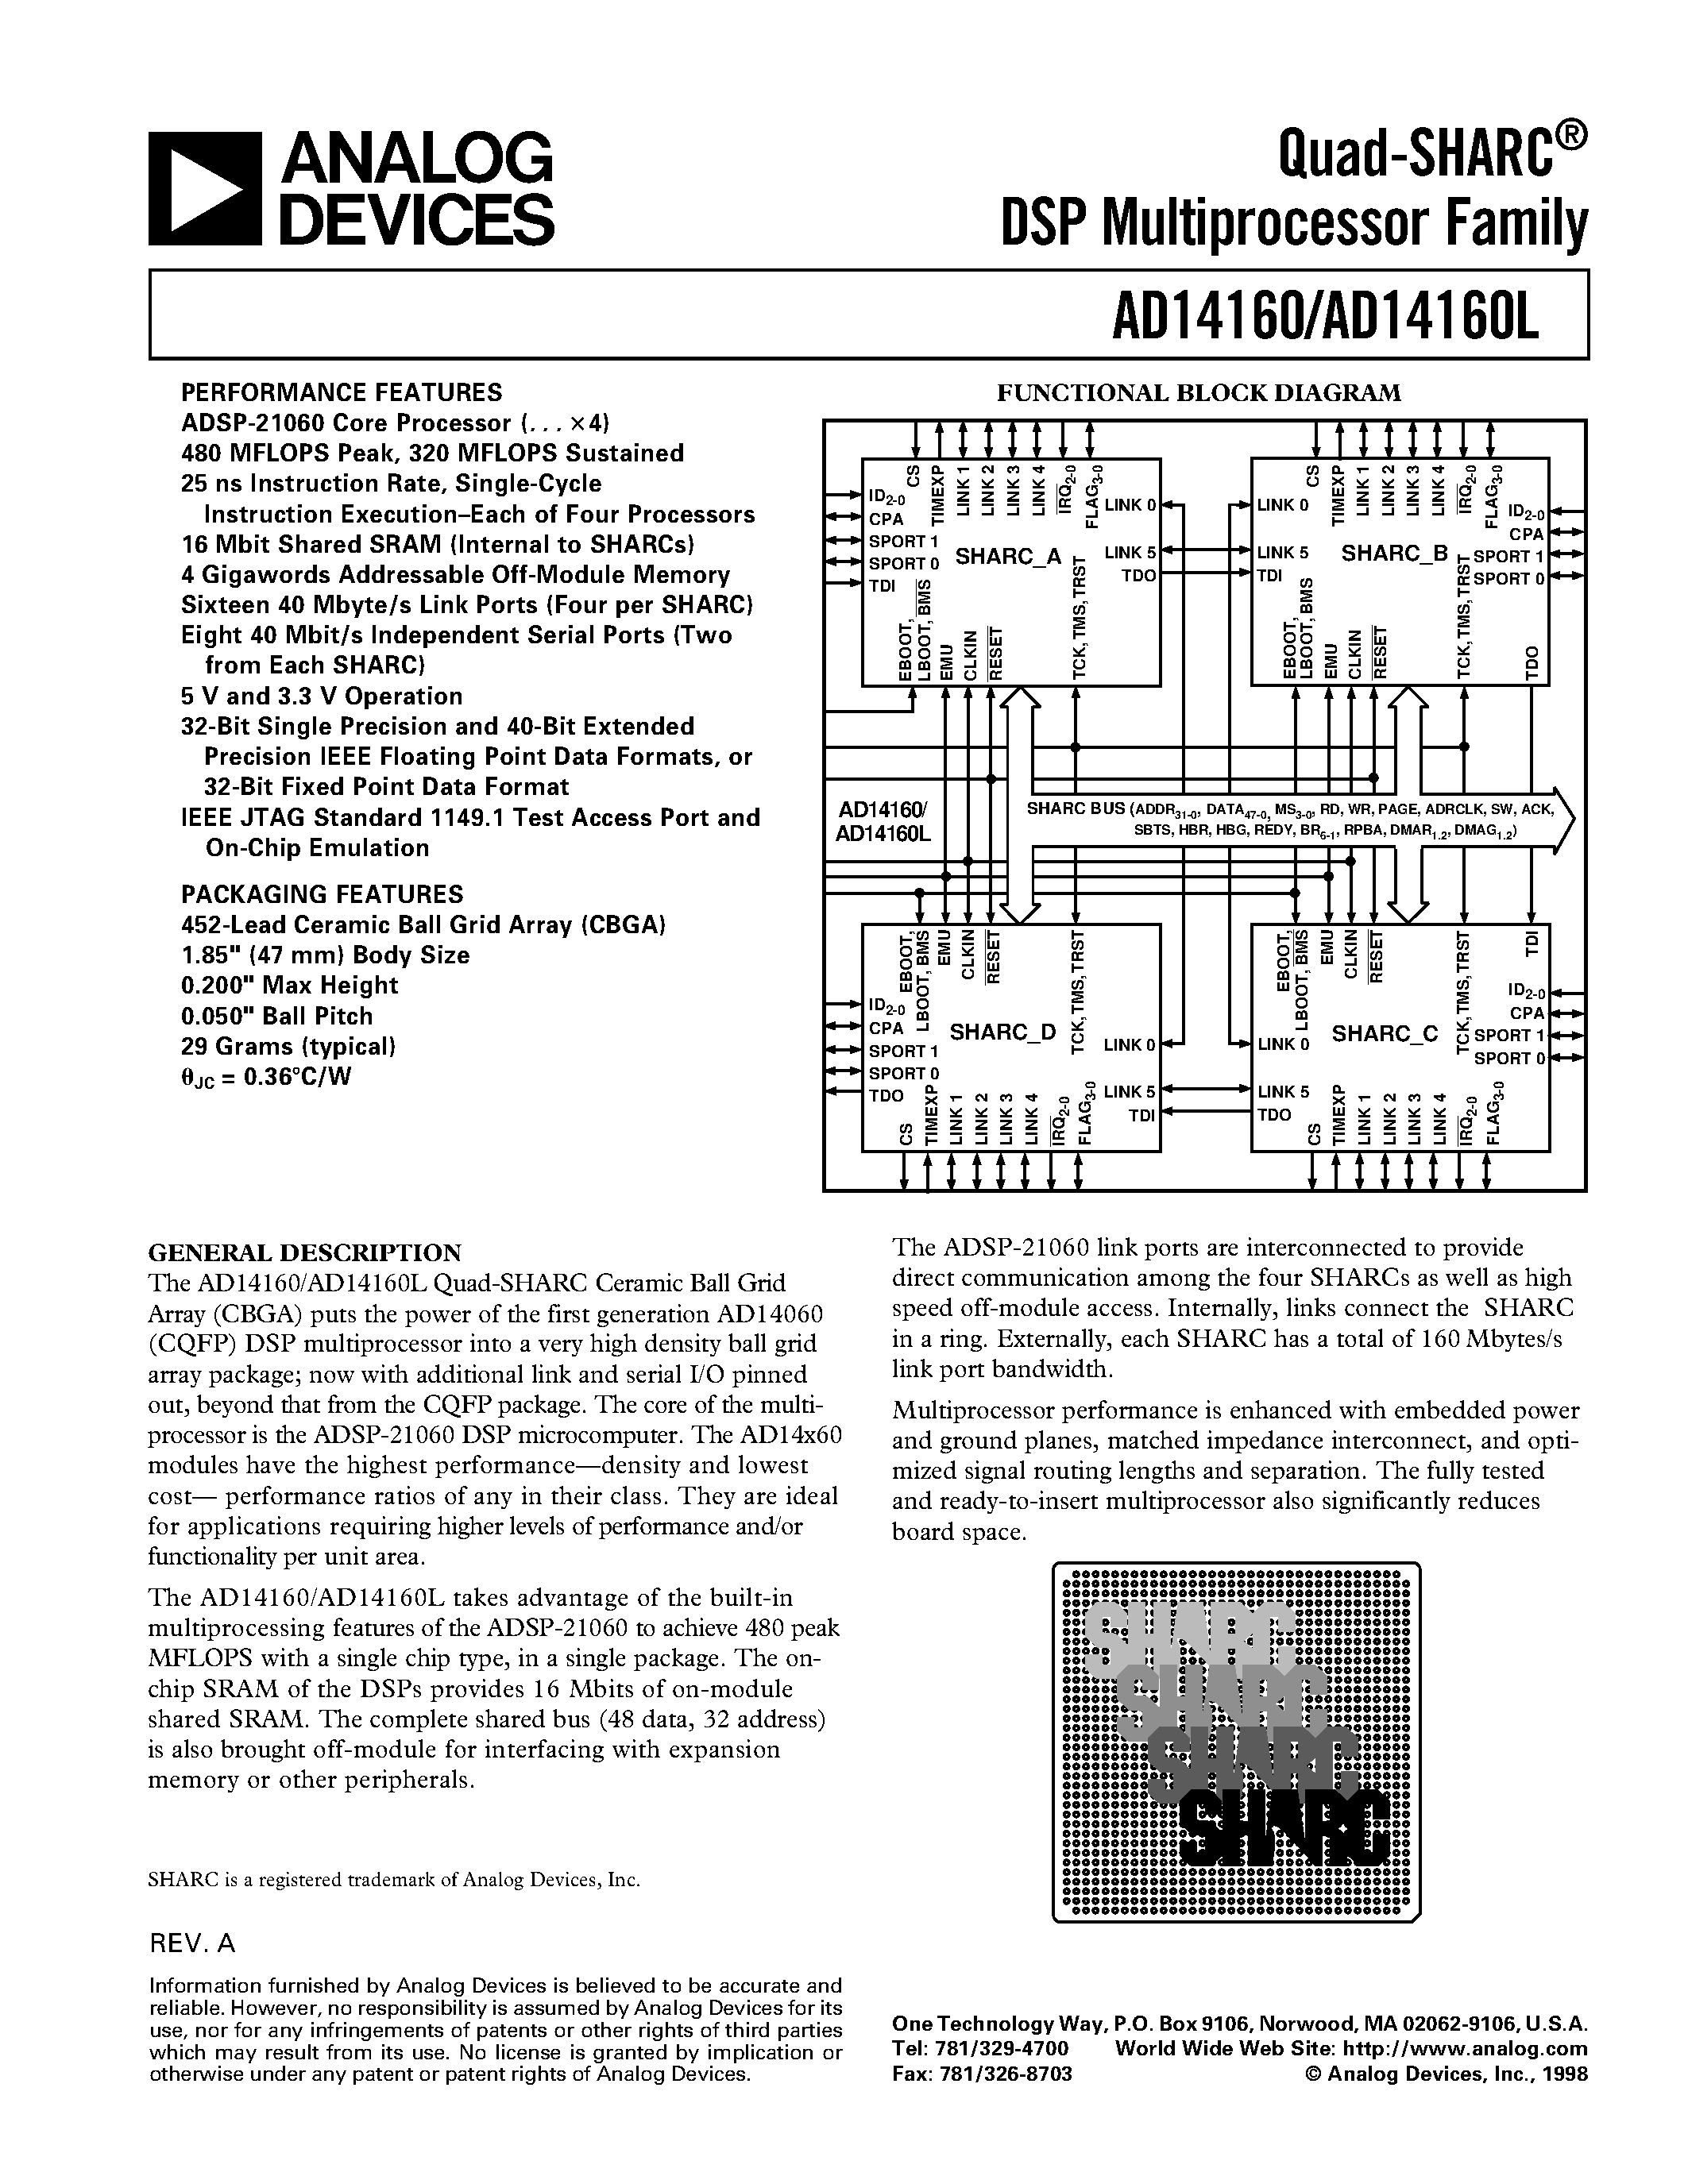 Datasheet AD14160L - Quad-SHARC DSP Multiprocessor Family page 1